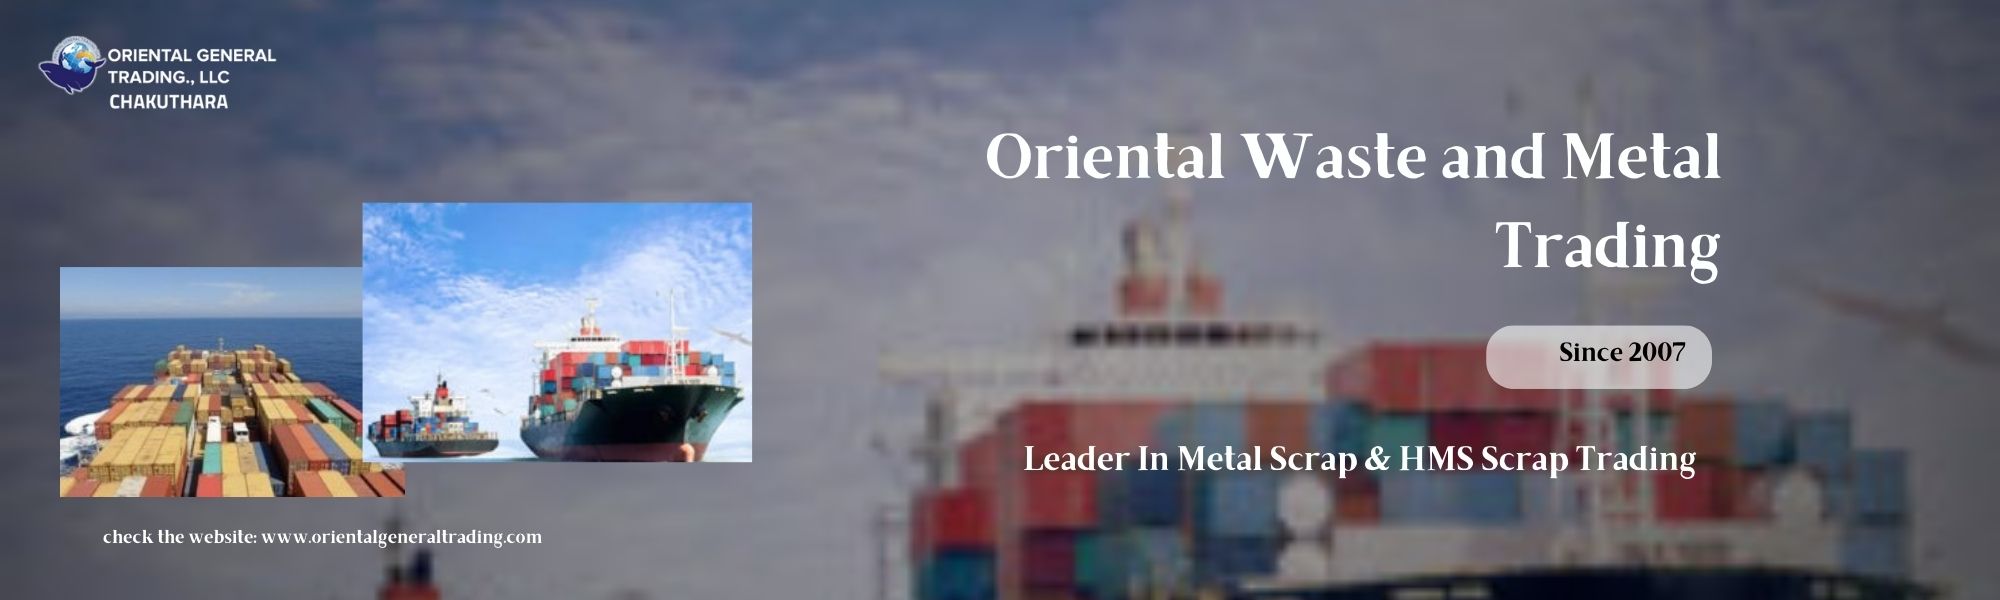 ORIENTAL WASTE AND METAL TRADING